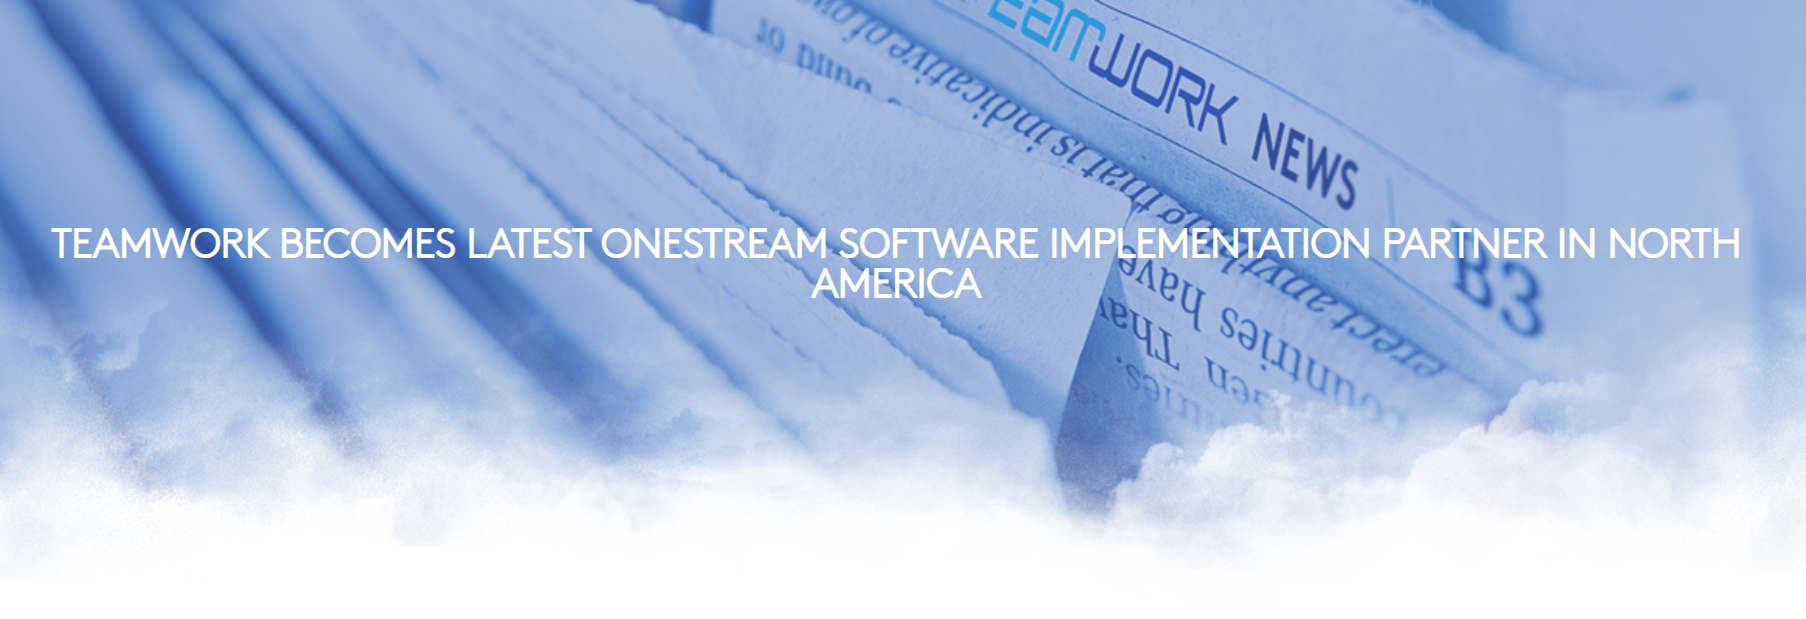 TeamWork becomes latest OneStream Software implementation partner in North America